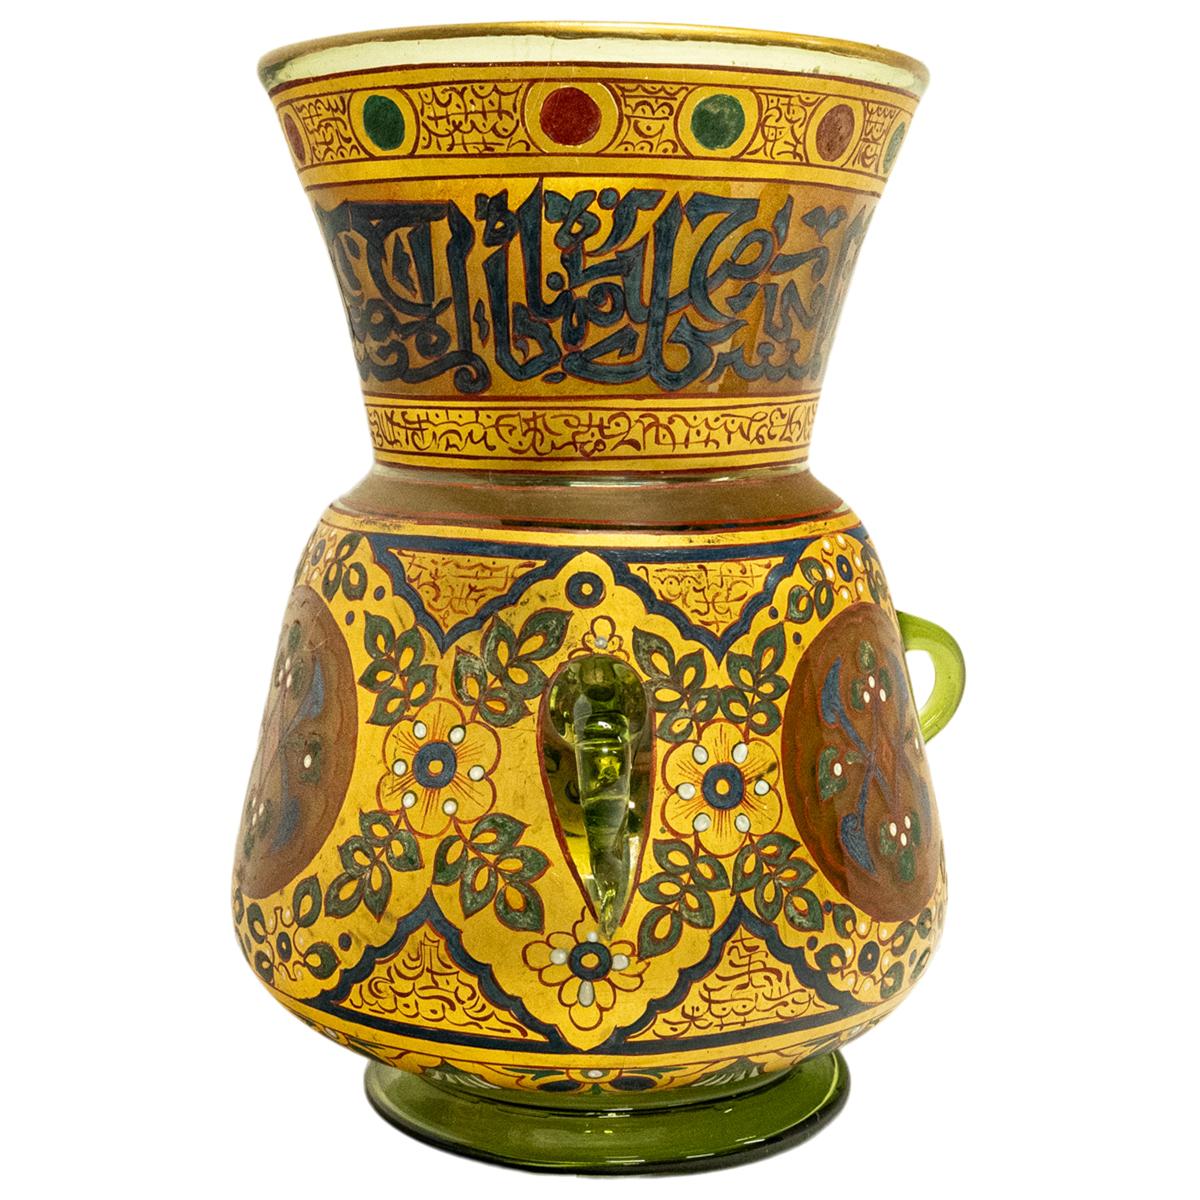 Antique French Islamic Glass Enamel Gilt Mamluk Revival Mosque Lamp Brocard 1880 For Sale 5